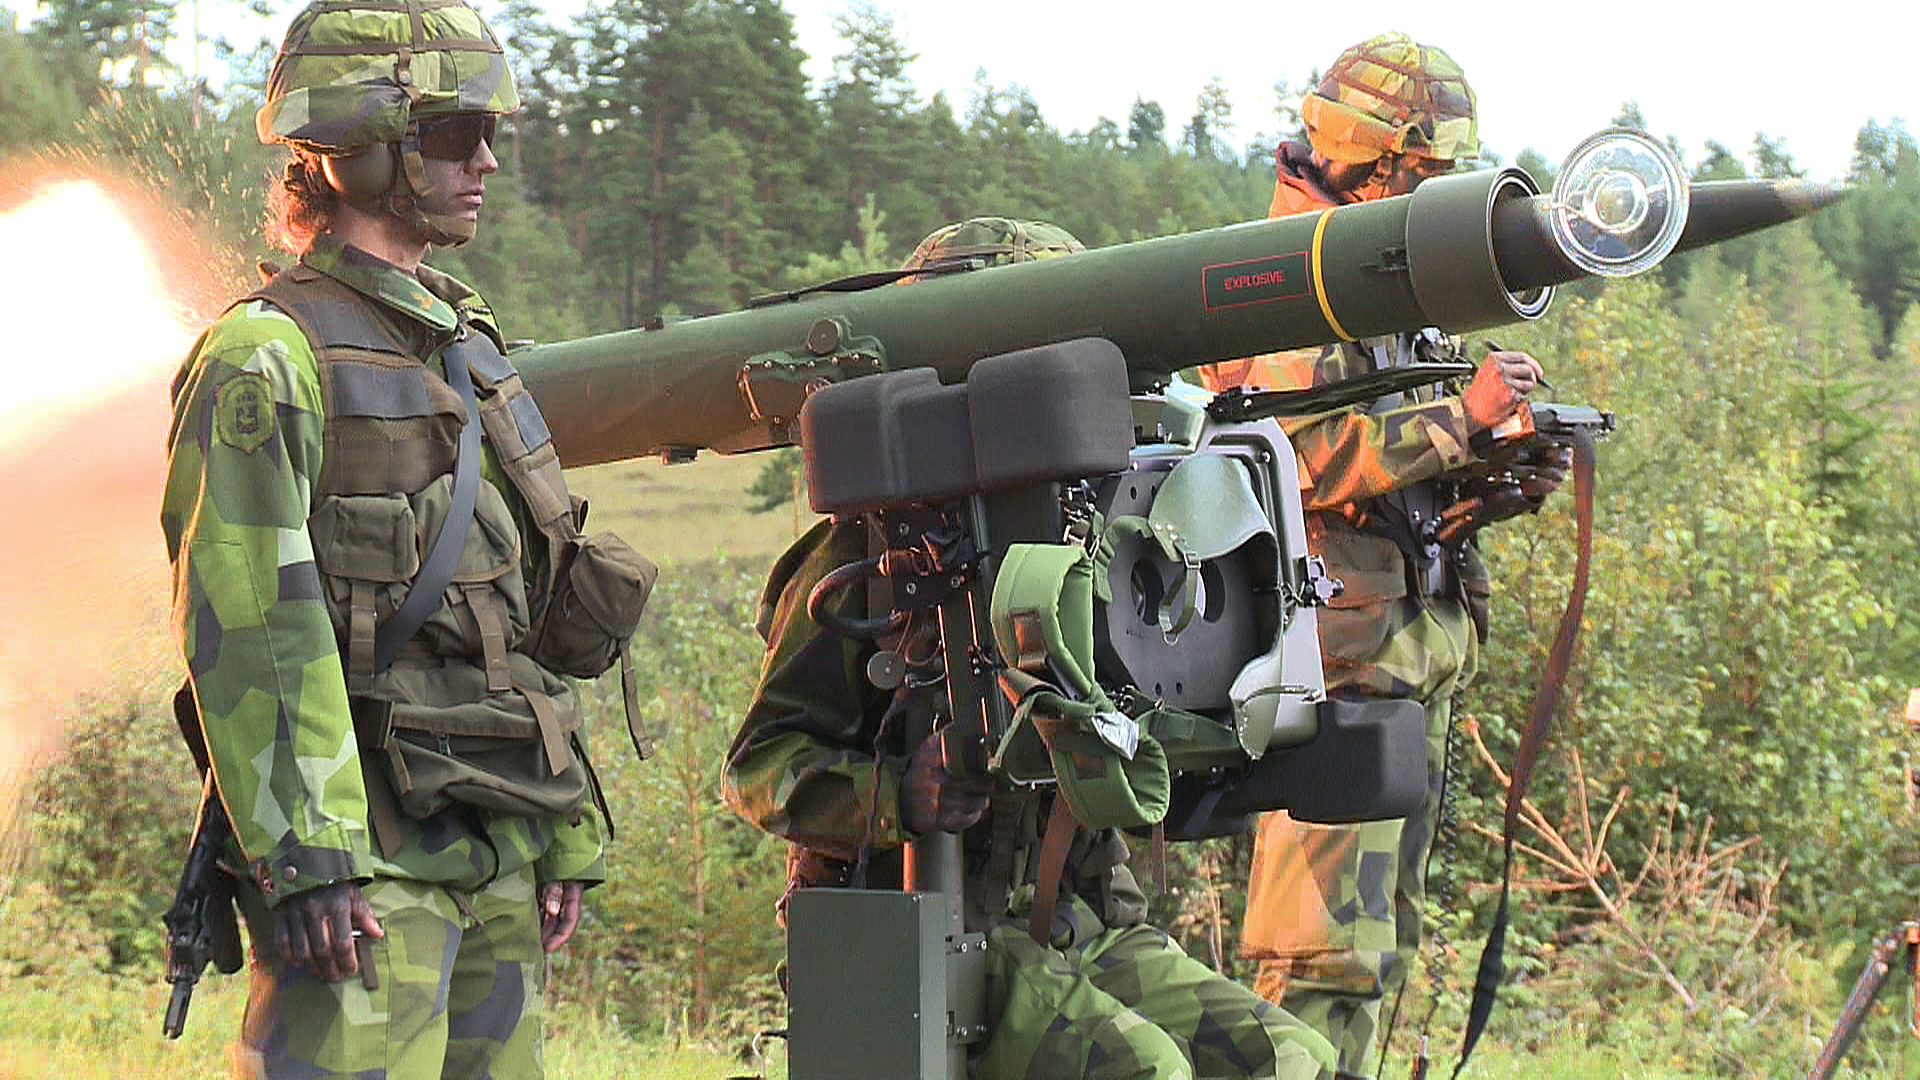 RBS 70 NG VSHORAD system – first time on display in France